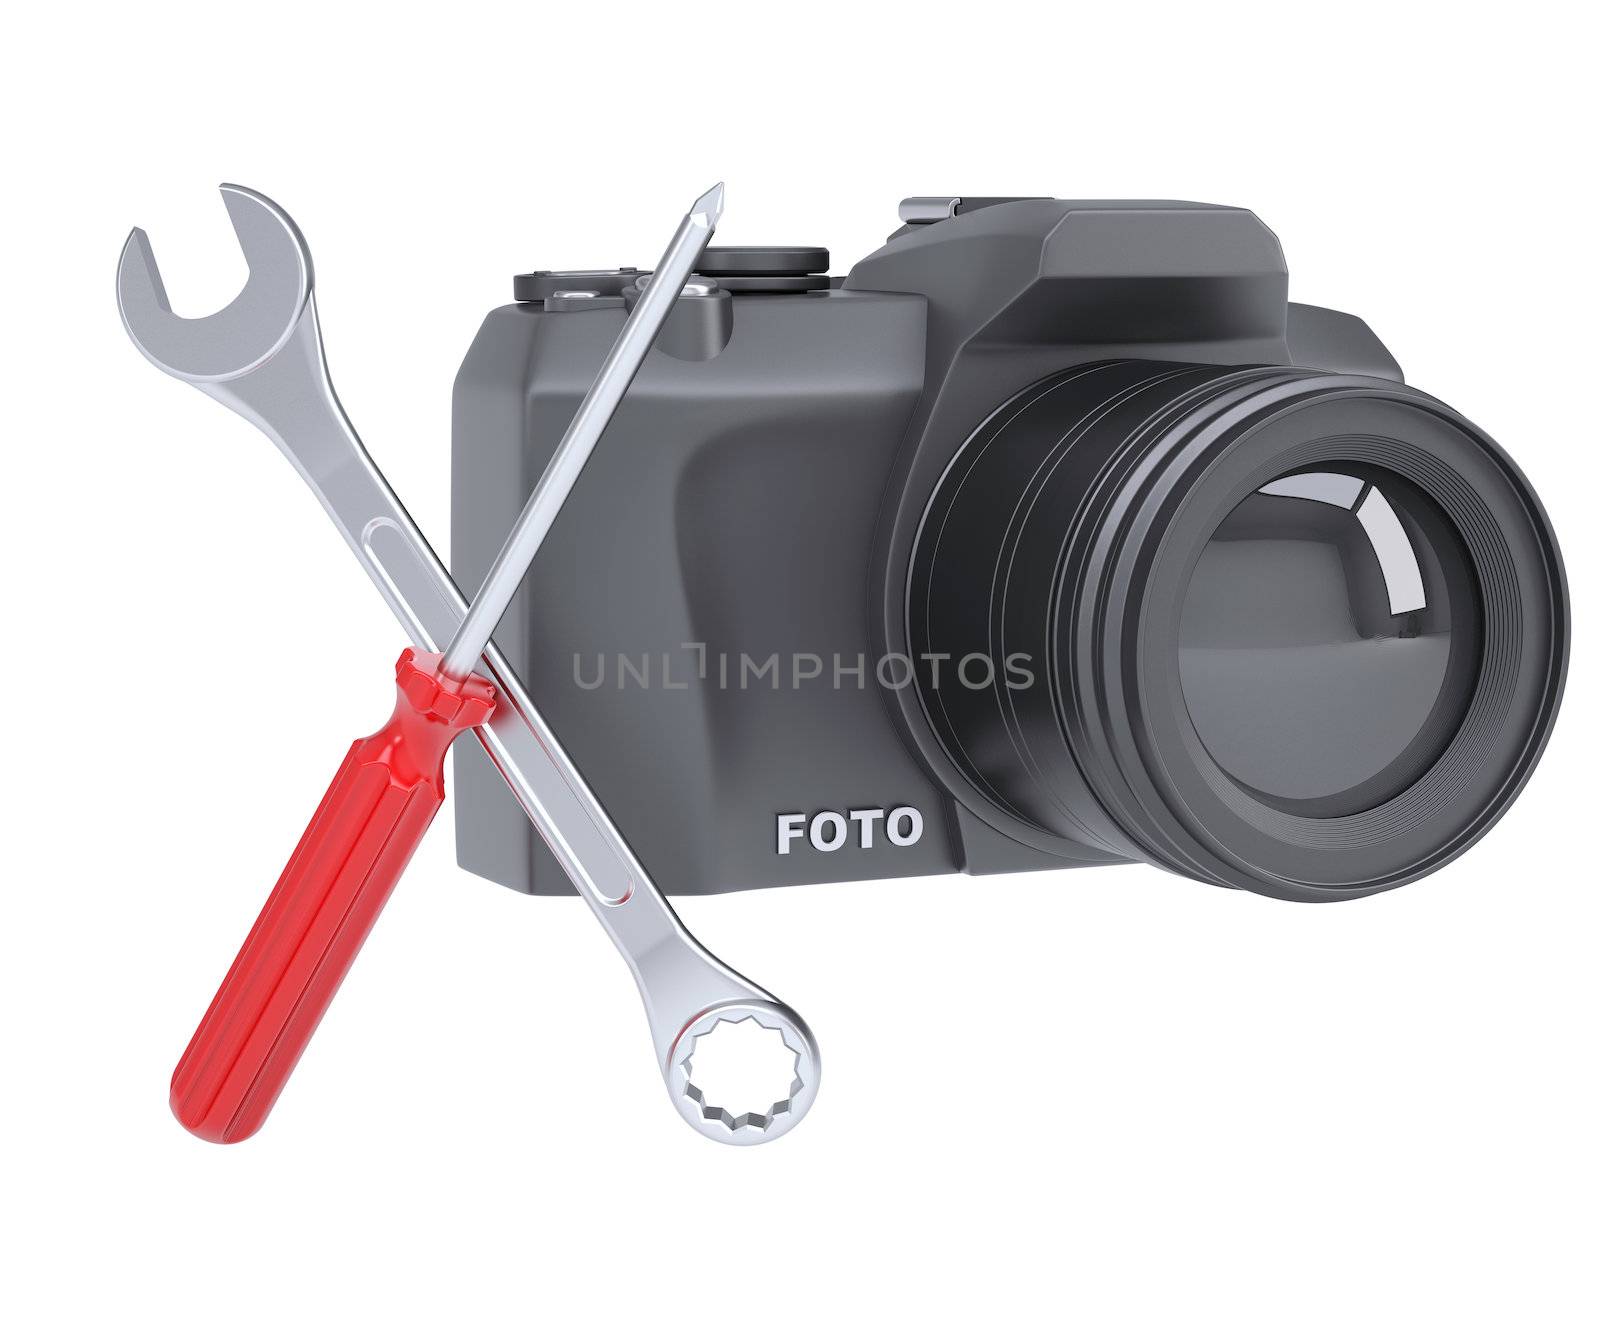 SLR camera, a screwdriver and a wrench by cherezoff